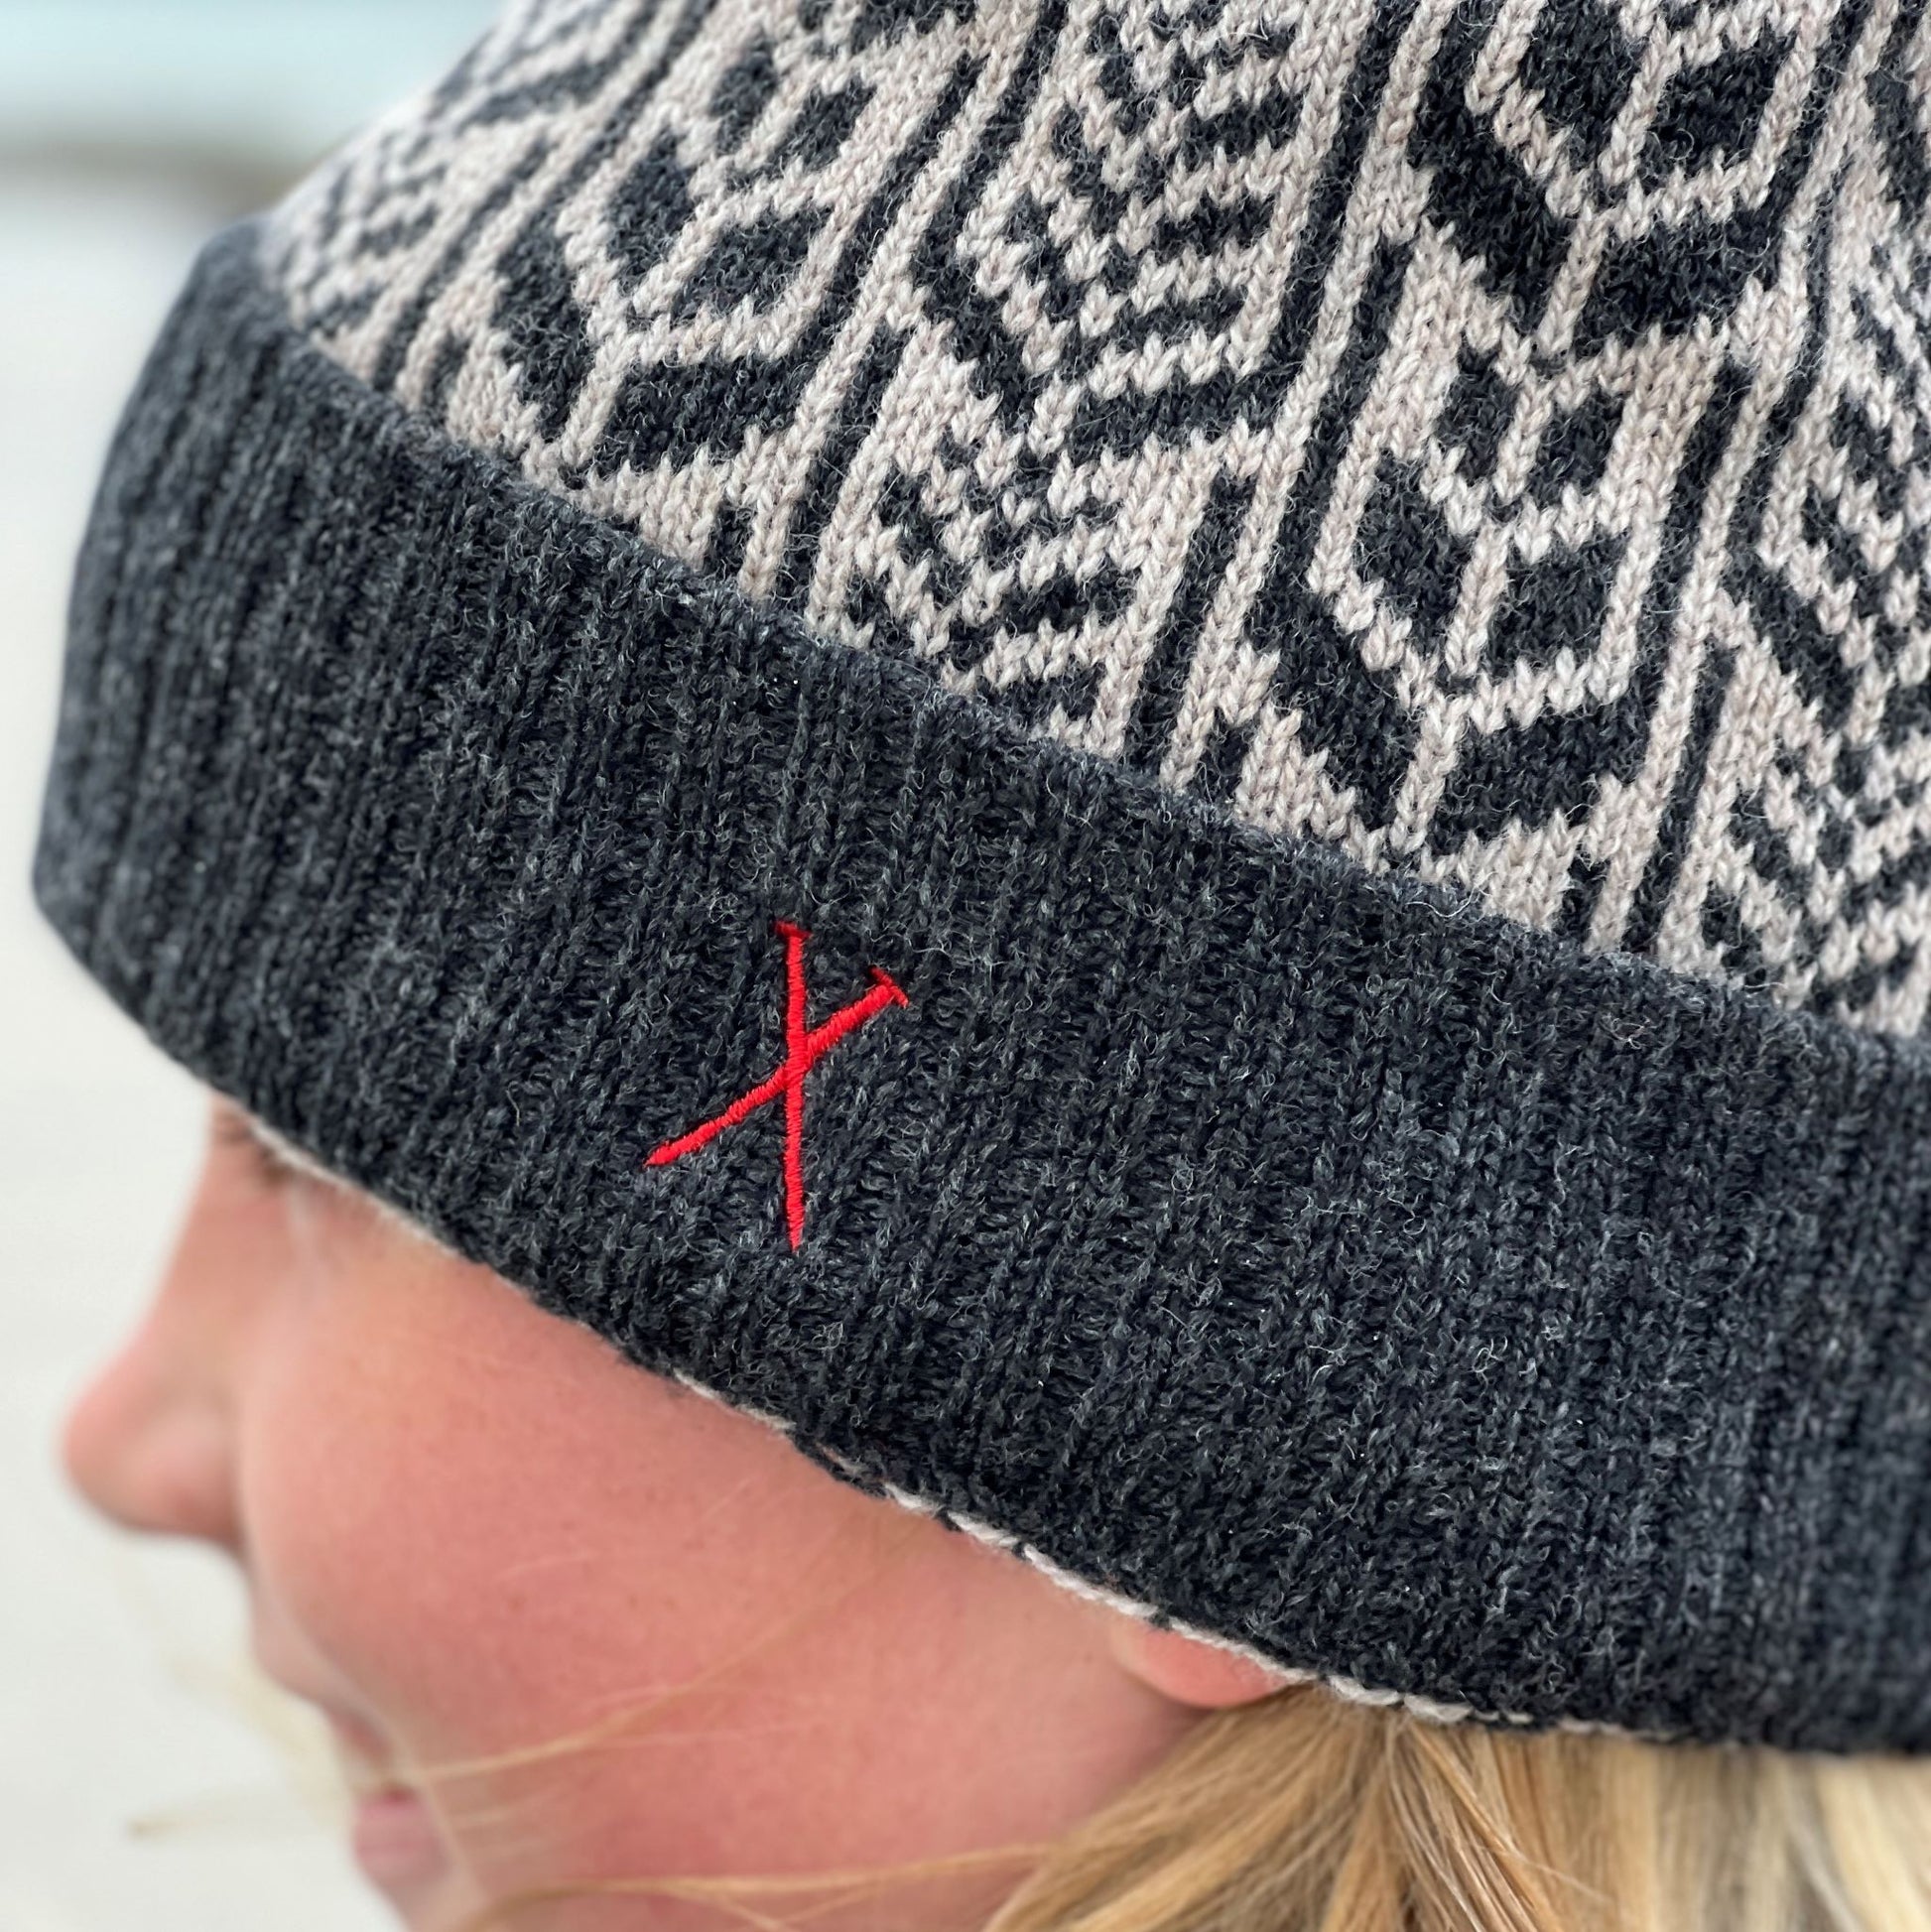 Our beanies are hand loomed in Scotland from 100% pure merino lambs wool. Merino wool has amazing natural properties including being biodegradable, super soft, warm and breathable.